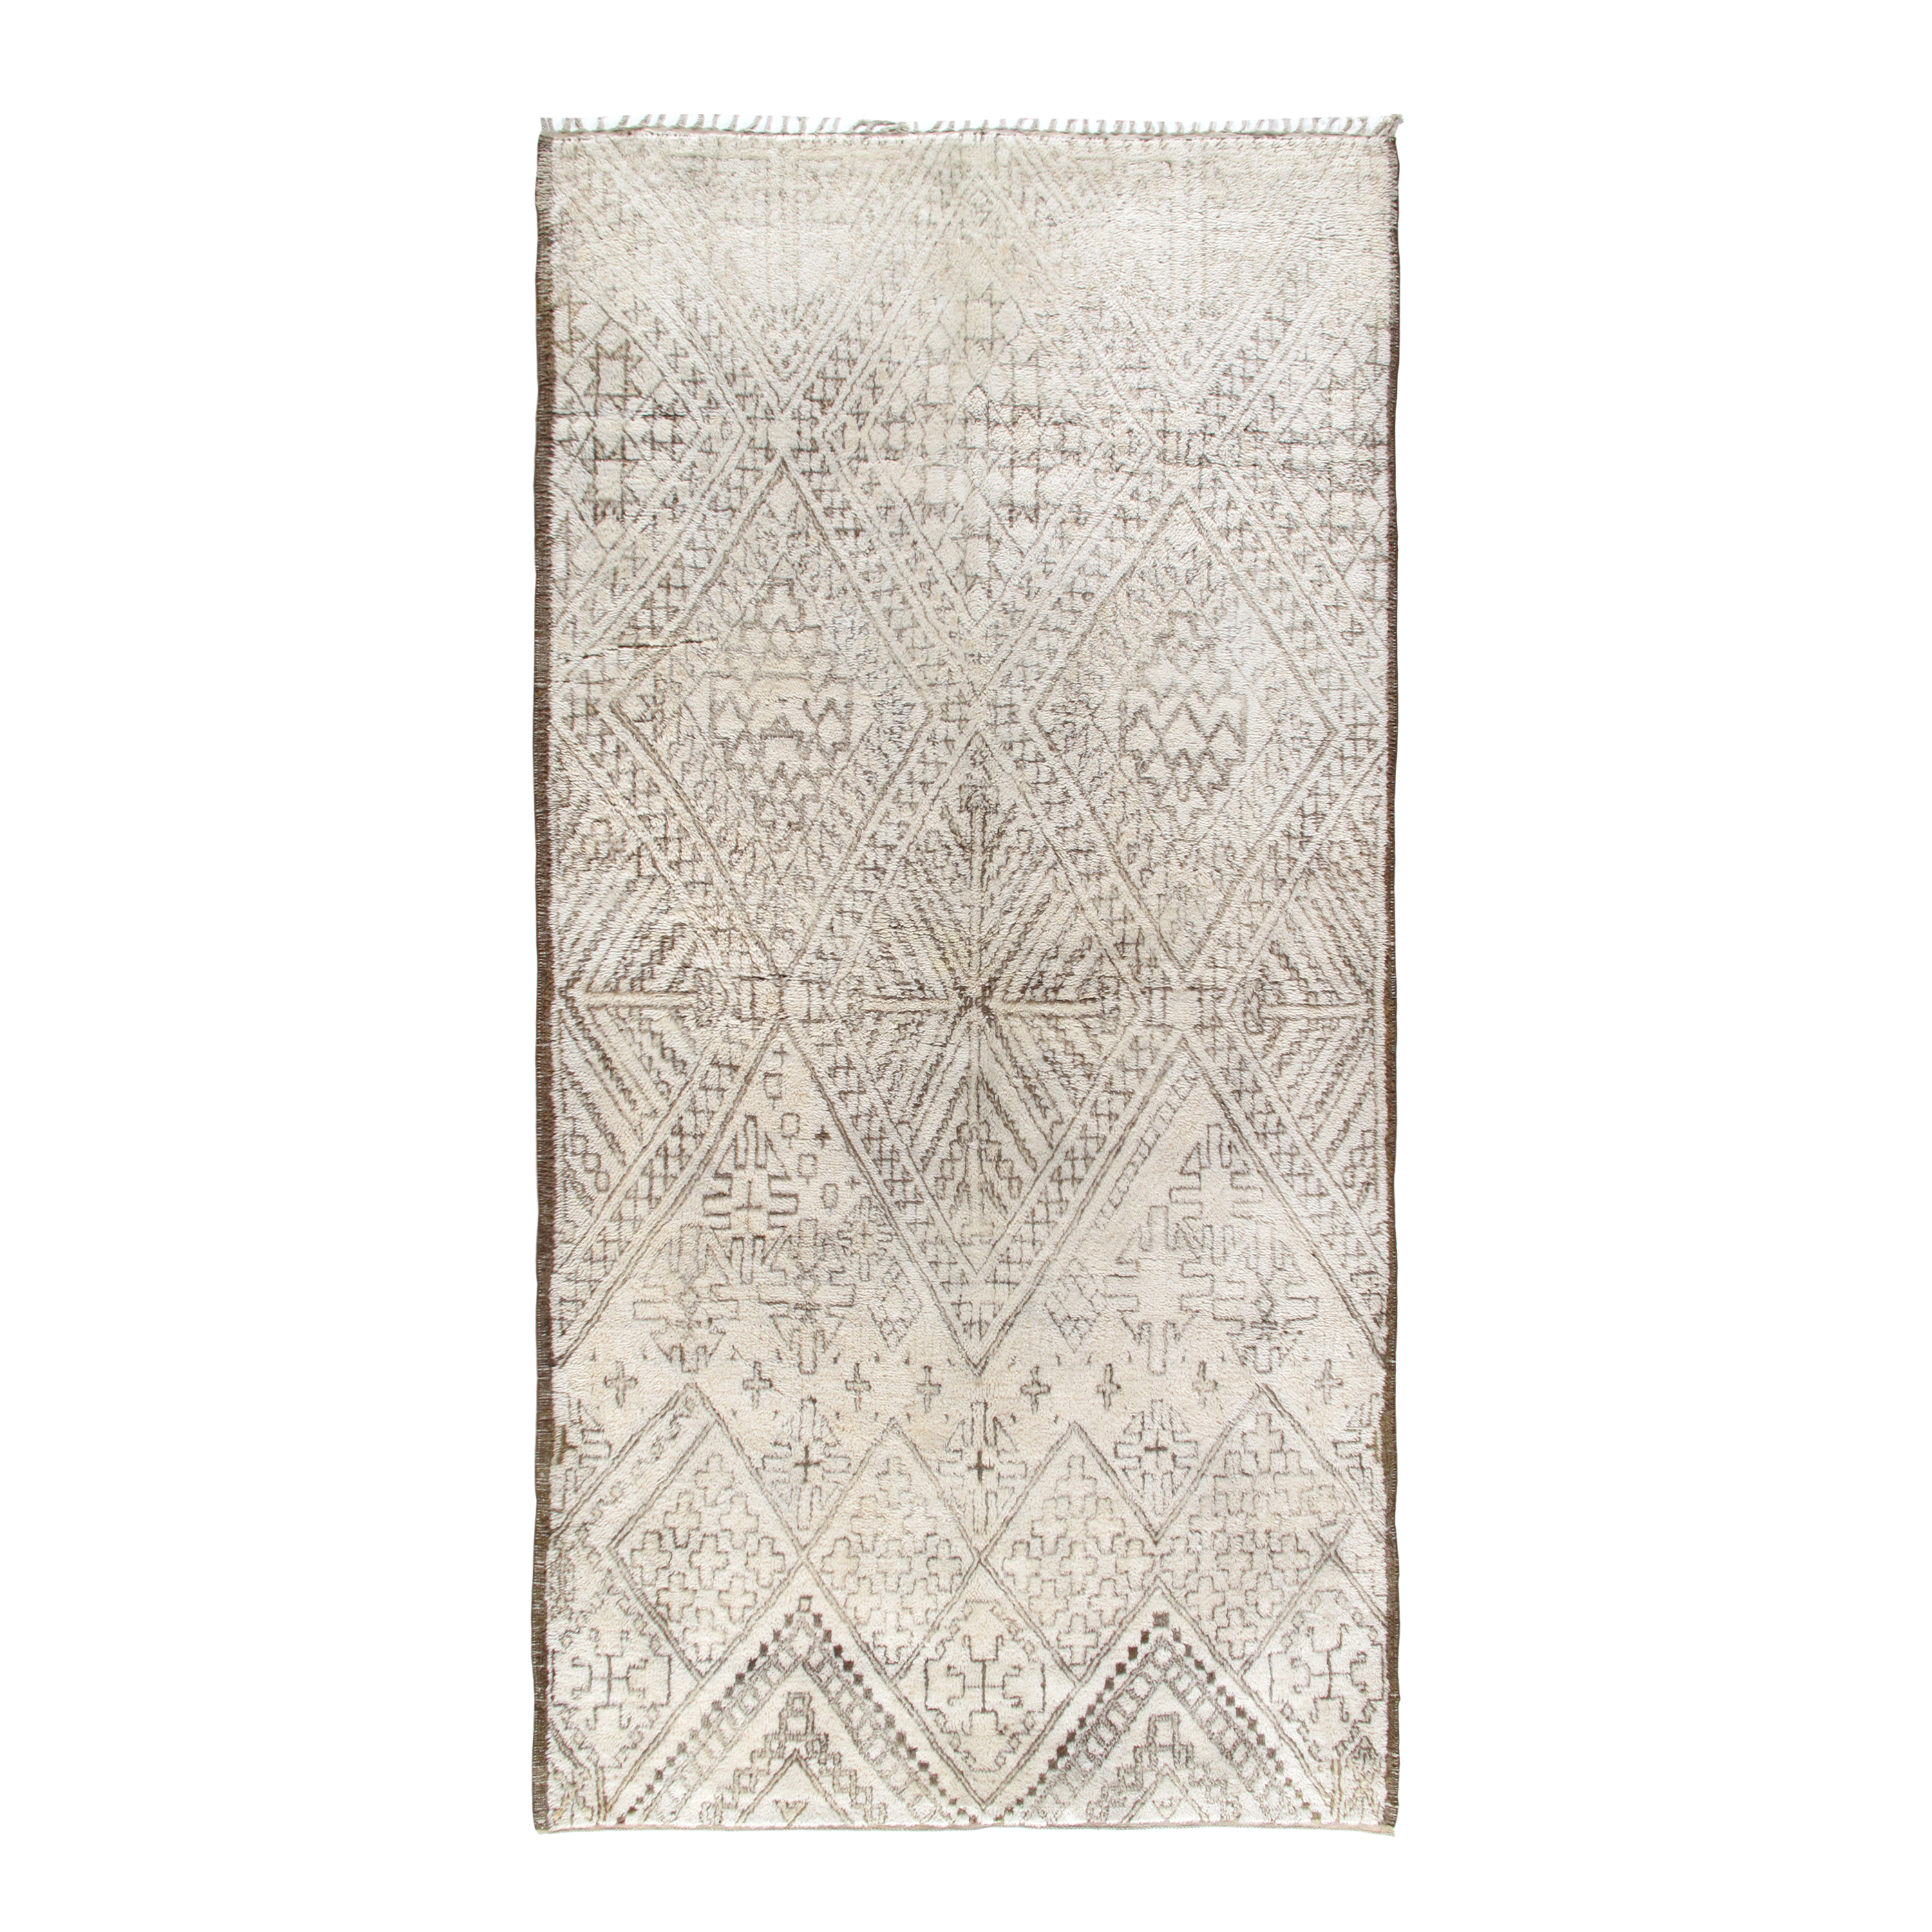 This Berber rug is hand-knotted and and made of 100% wool. 